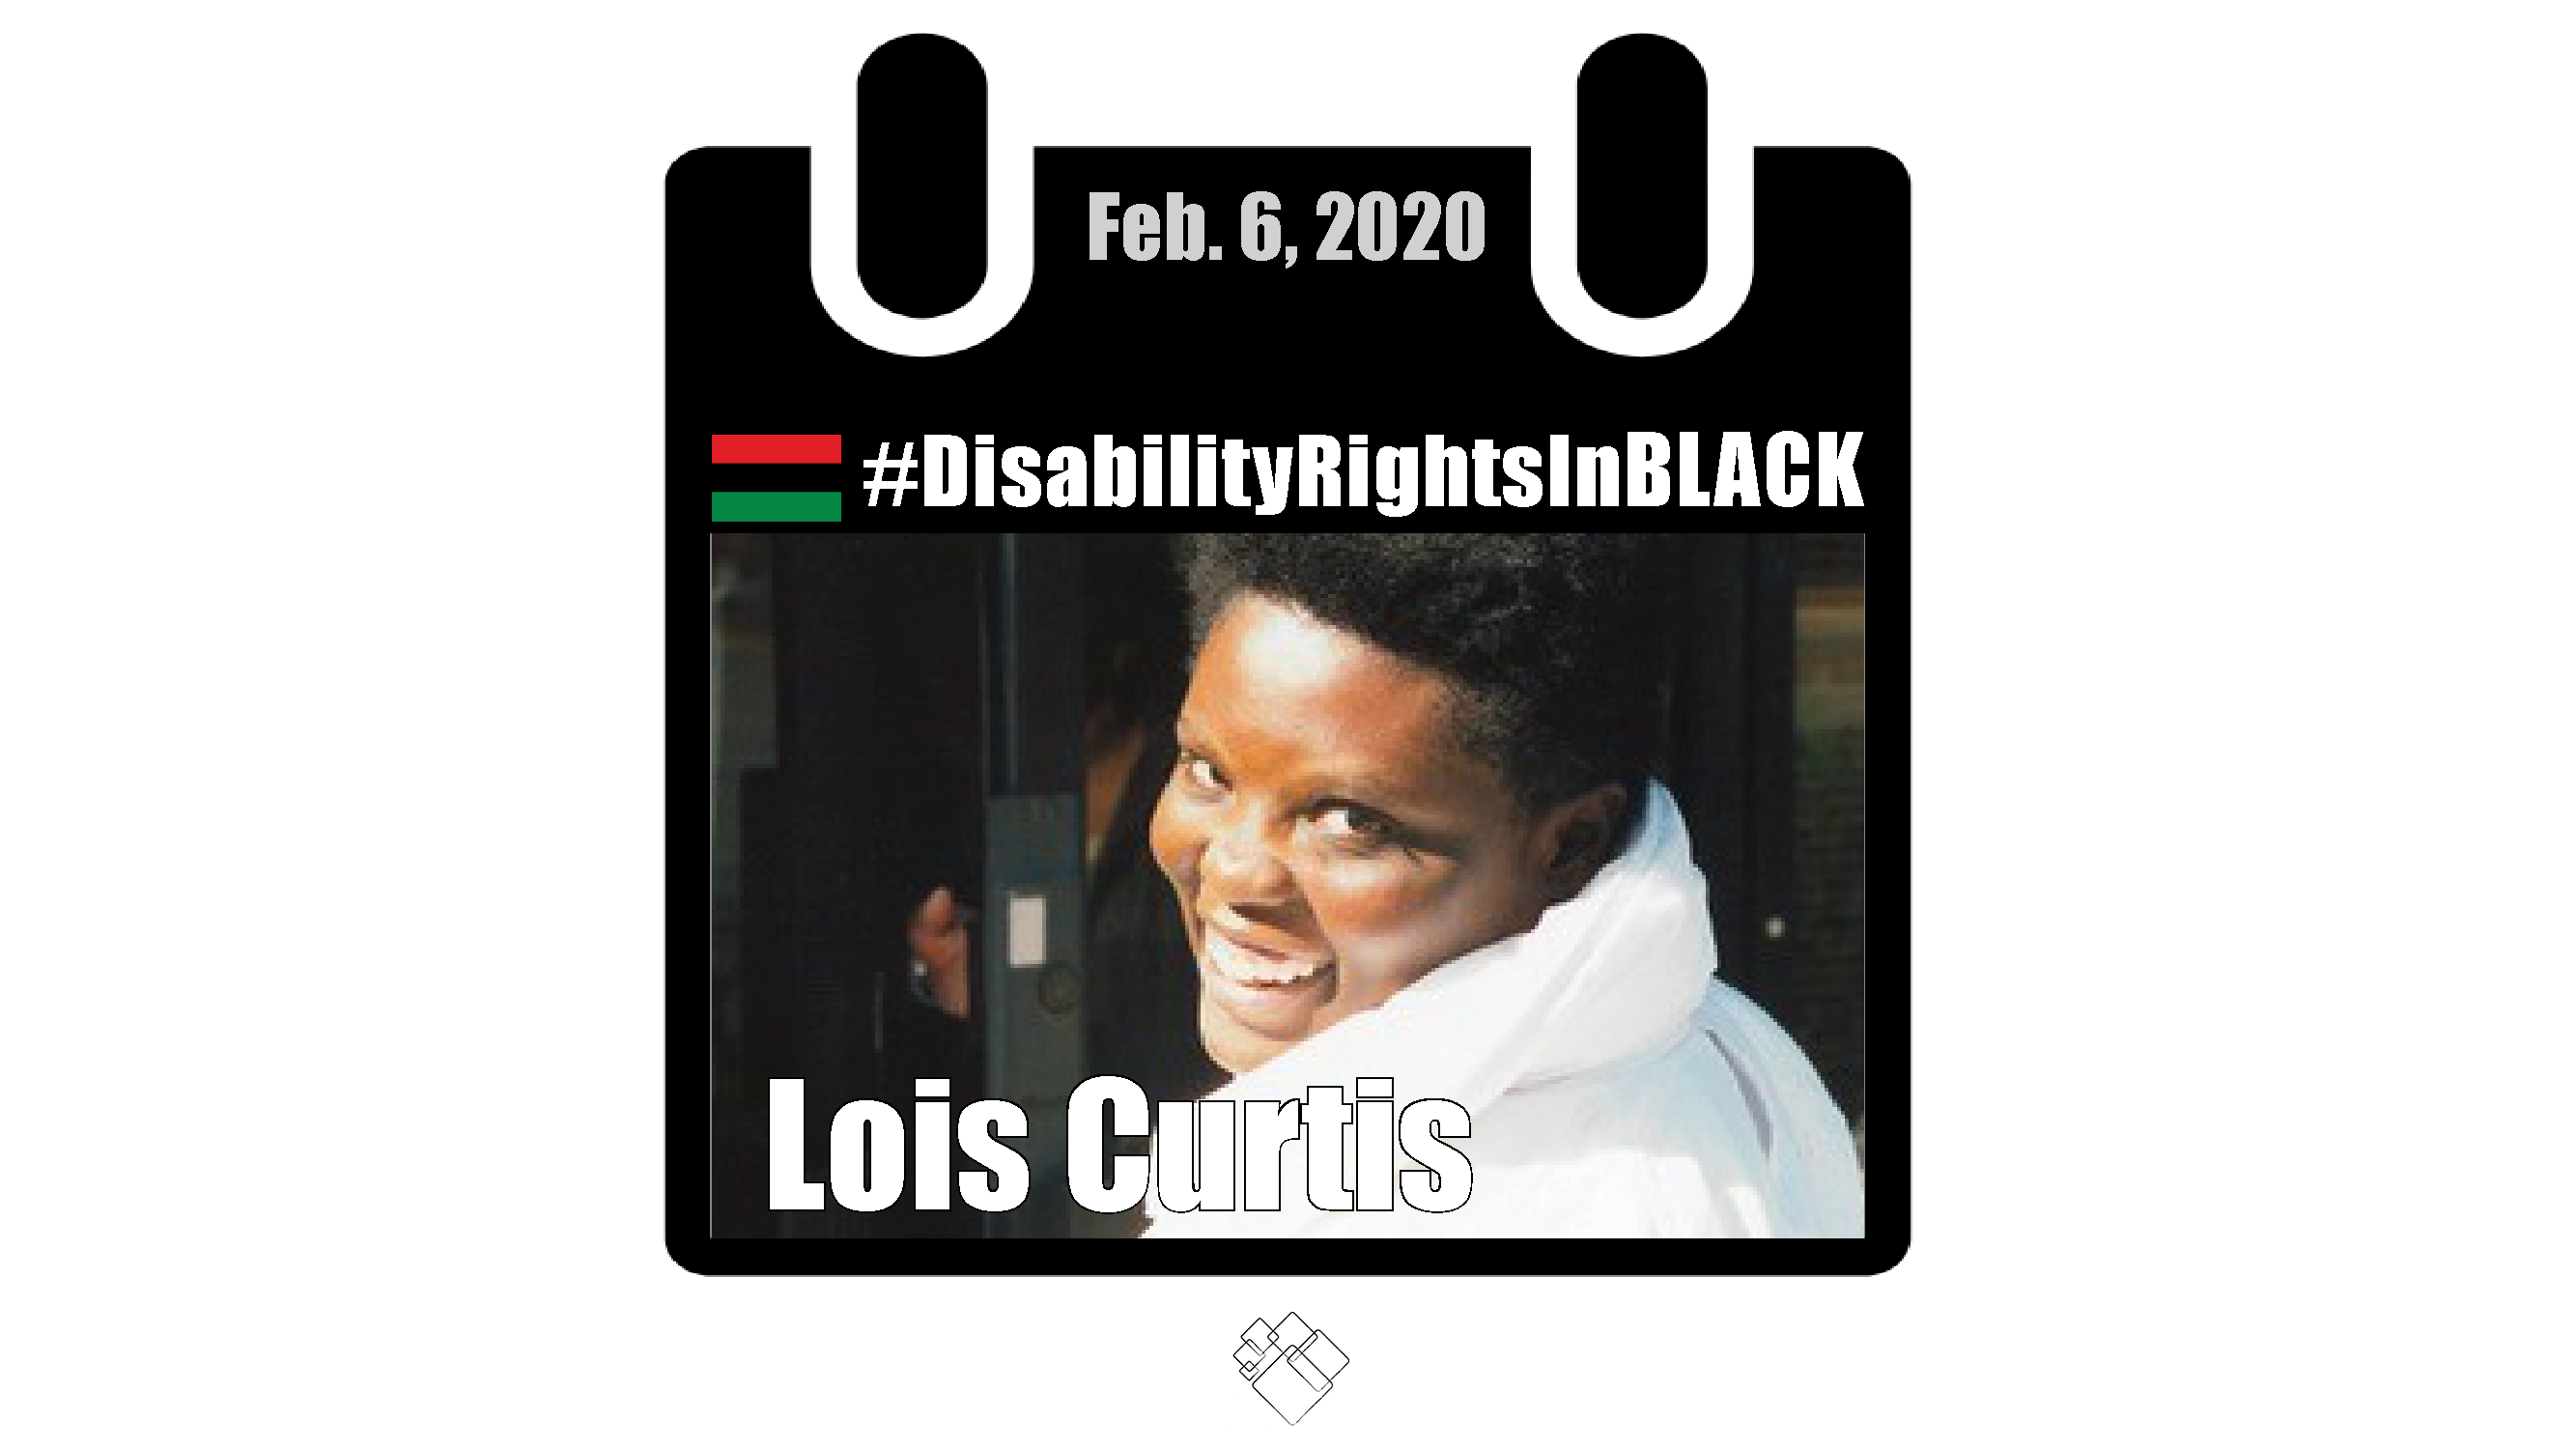 A young Lois Curtis smiles to the camera wearing a white jacket. The Disability Rights in Black calendar frames the photo.